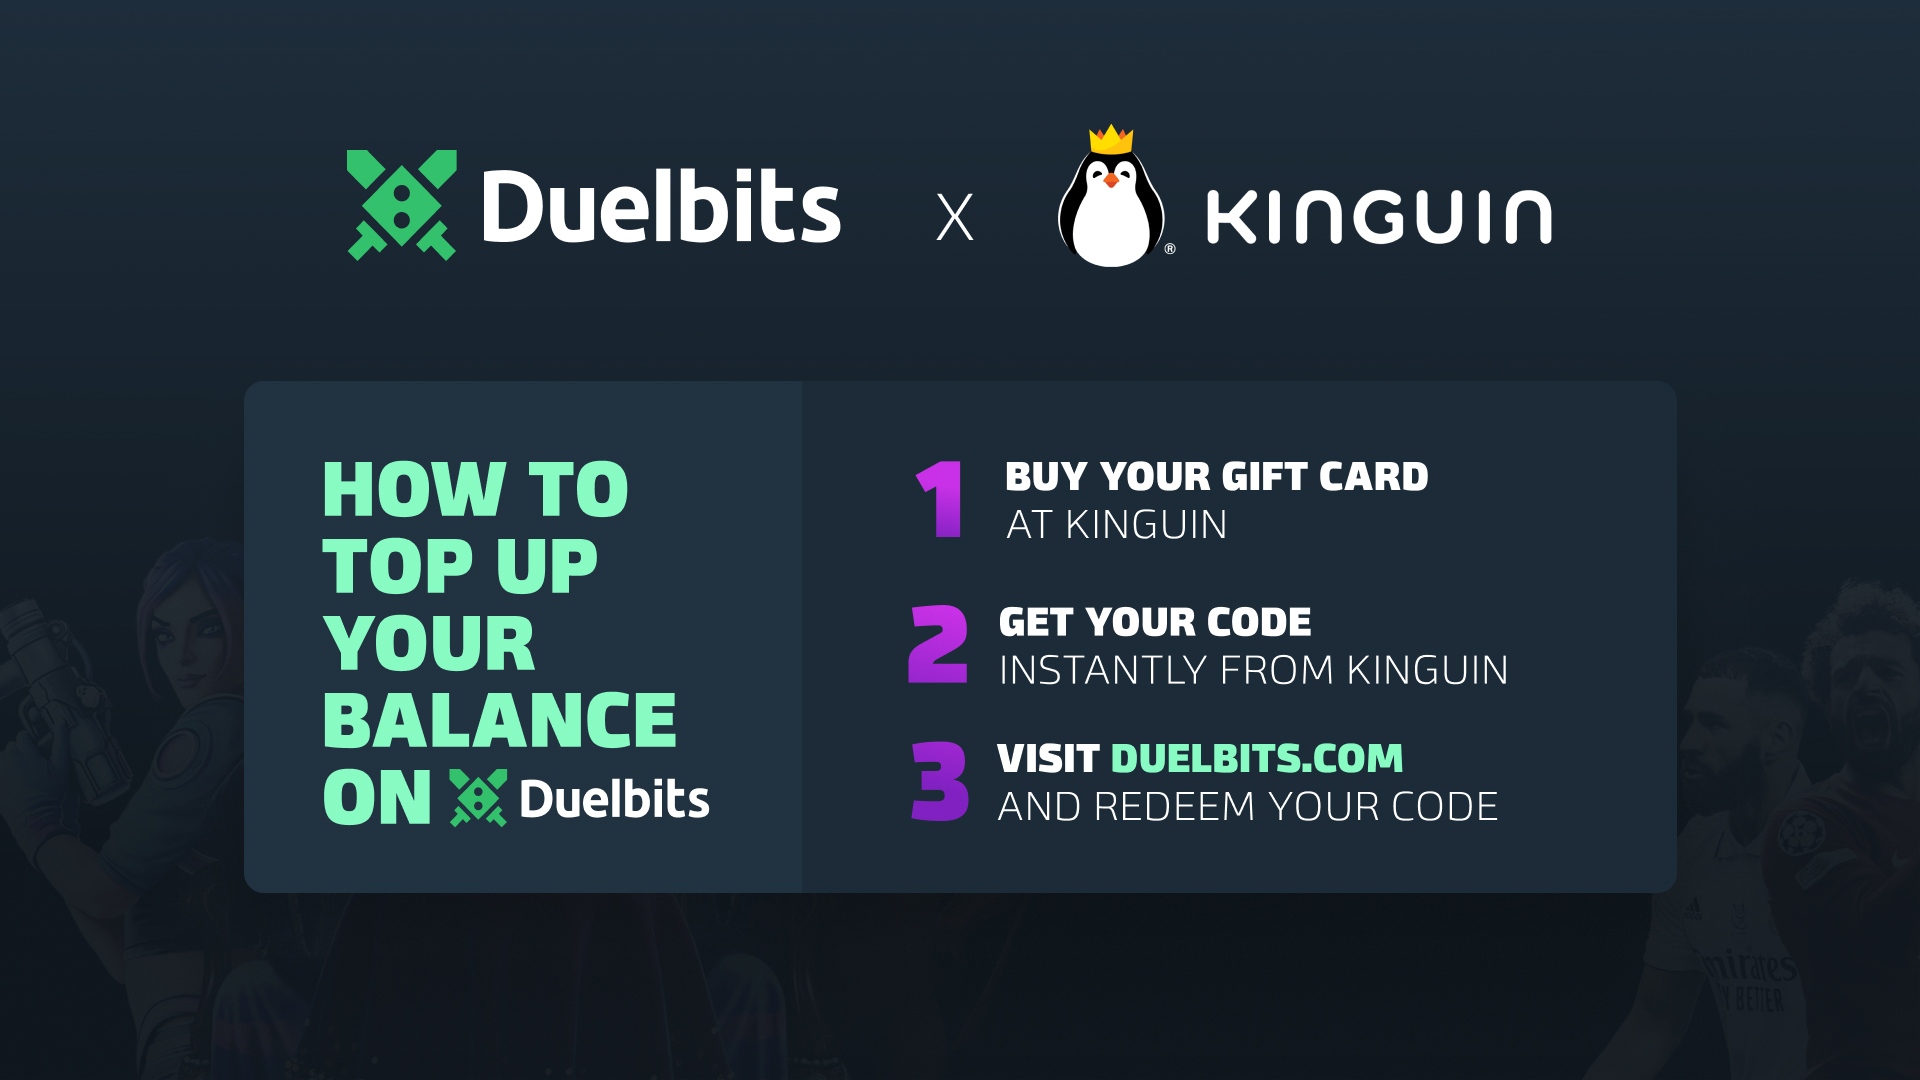 DuelBits $5 Gift Card